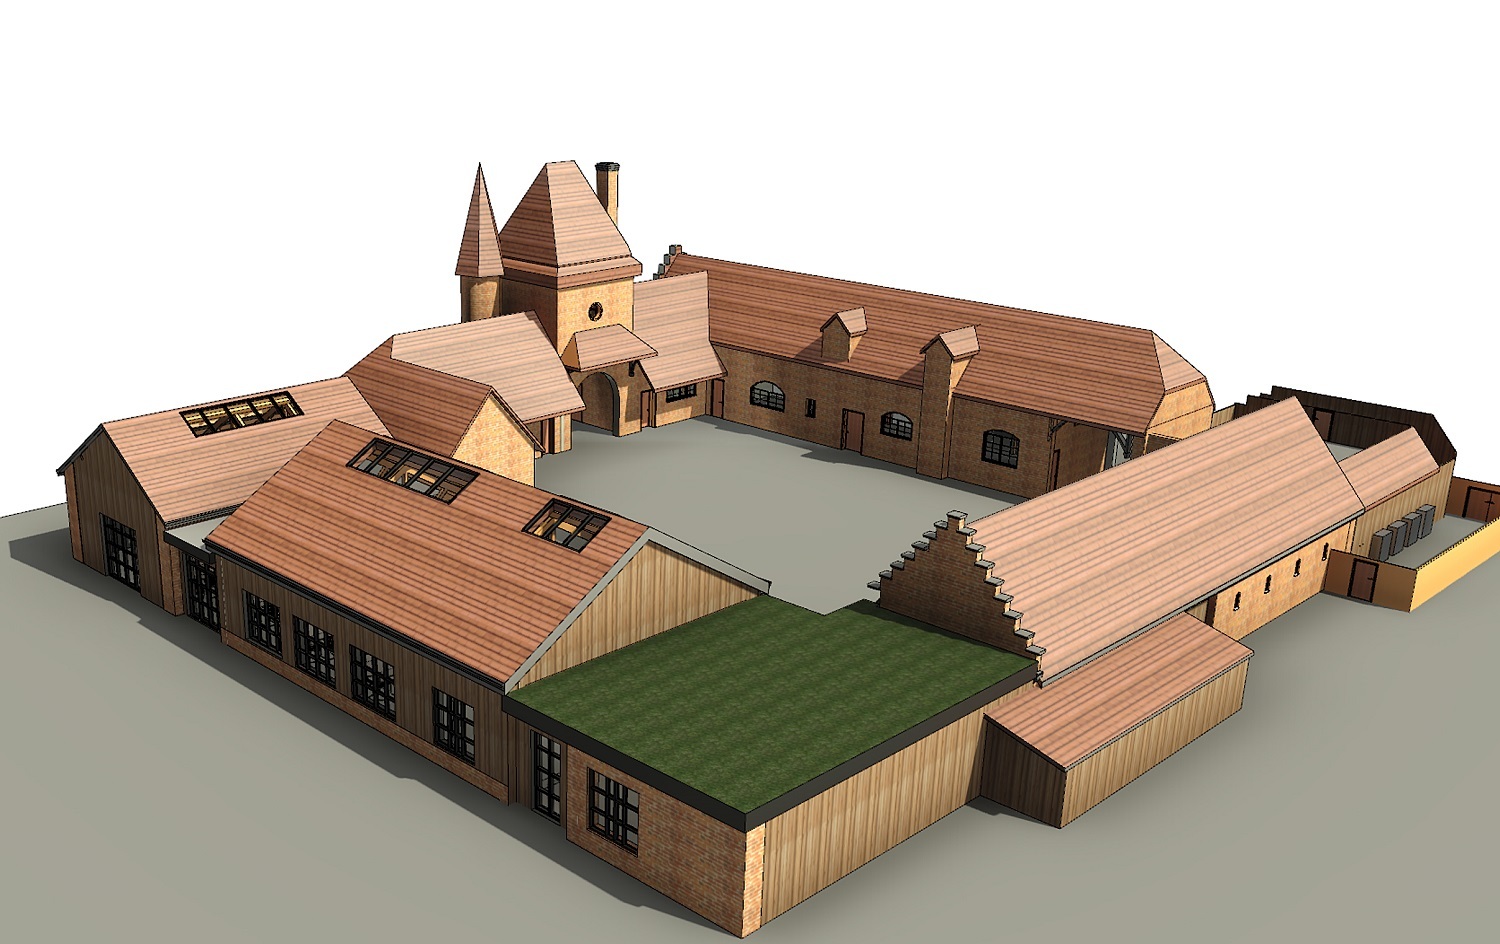 The Stables Yard at Chester Zoo - an artists impression of the redesigned space.